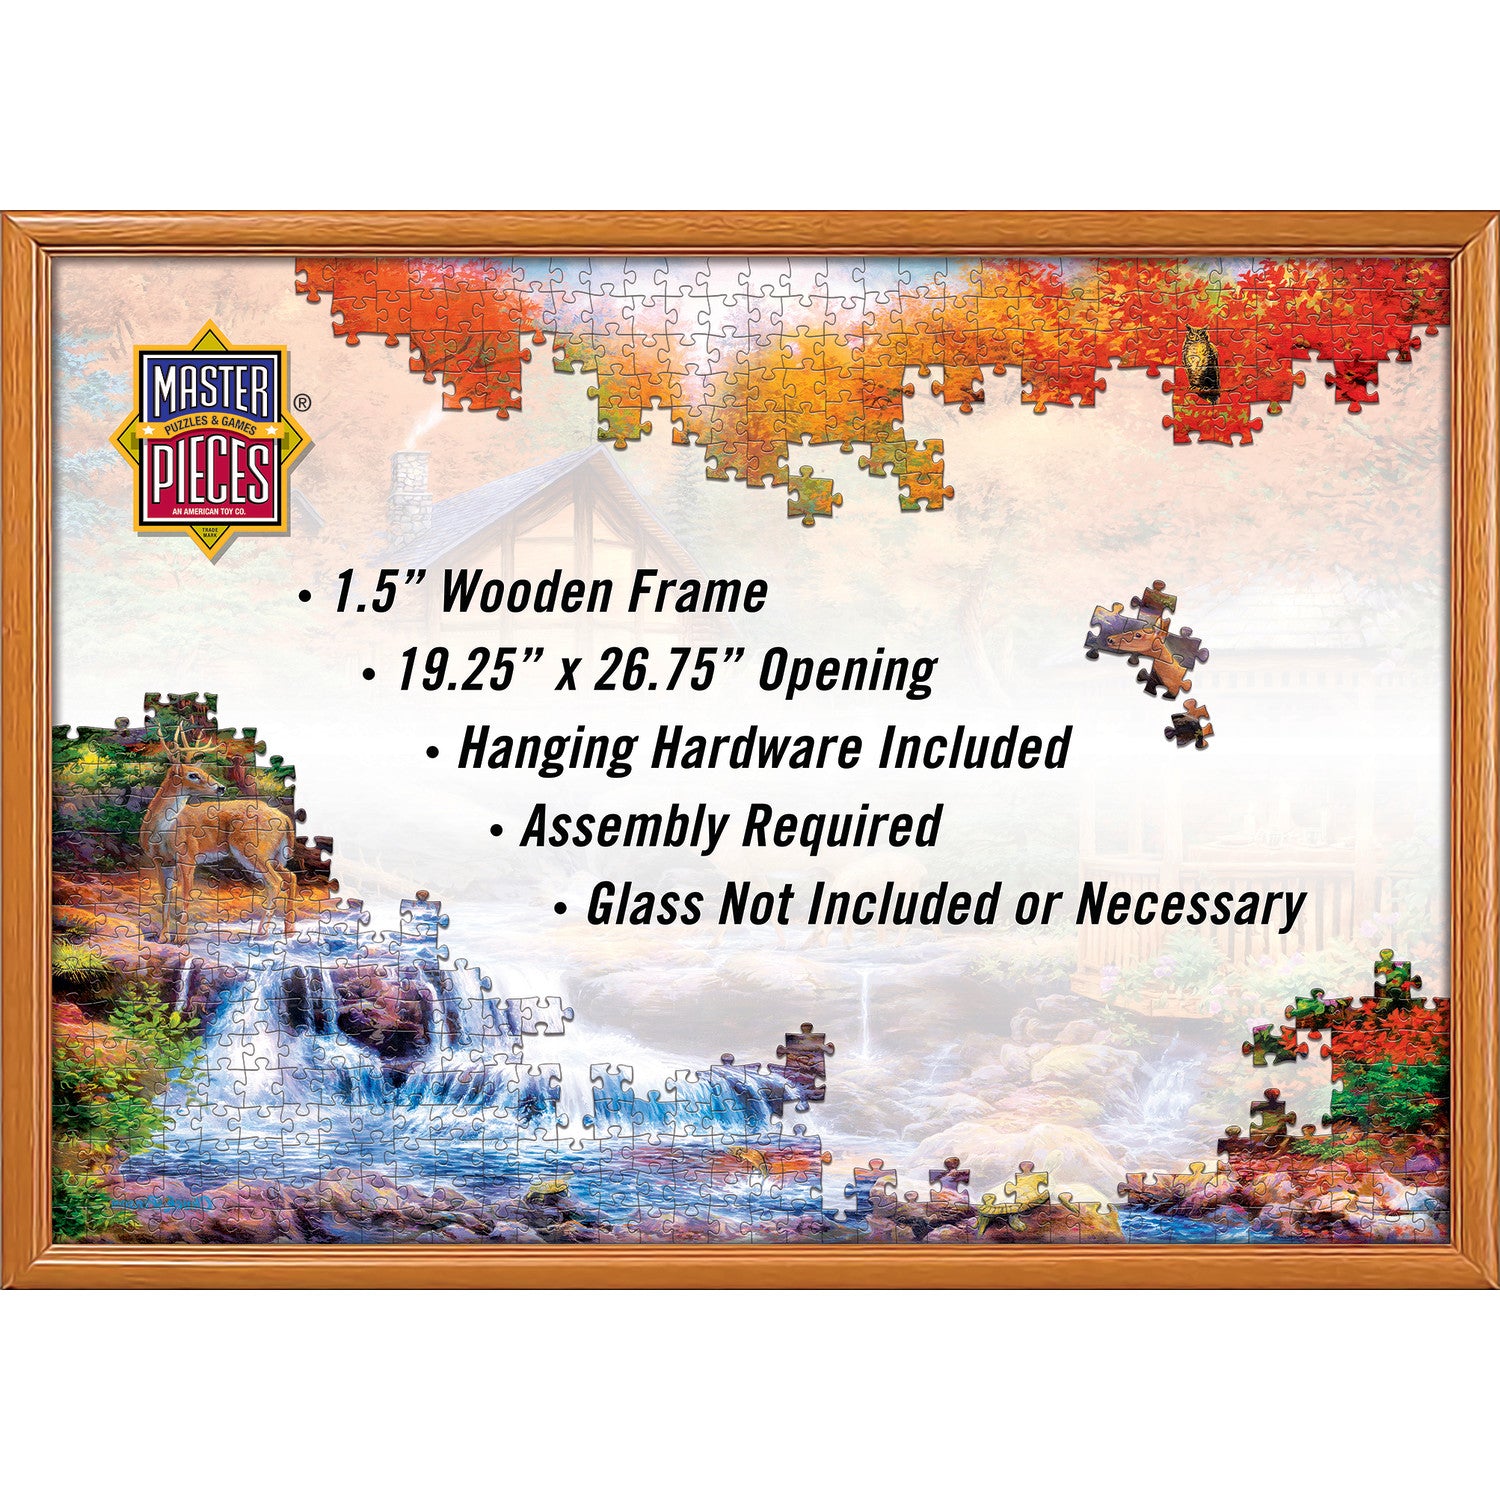 Wood Puzzle Frame - 19.25"x26.75"